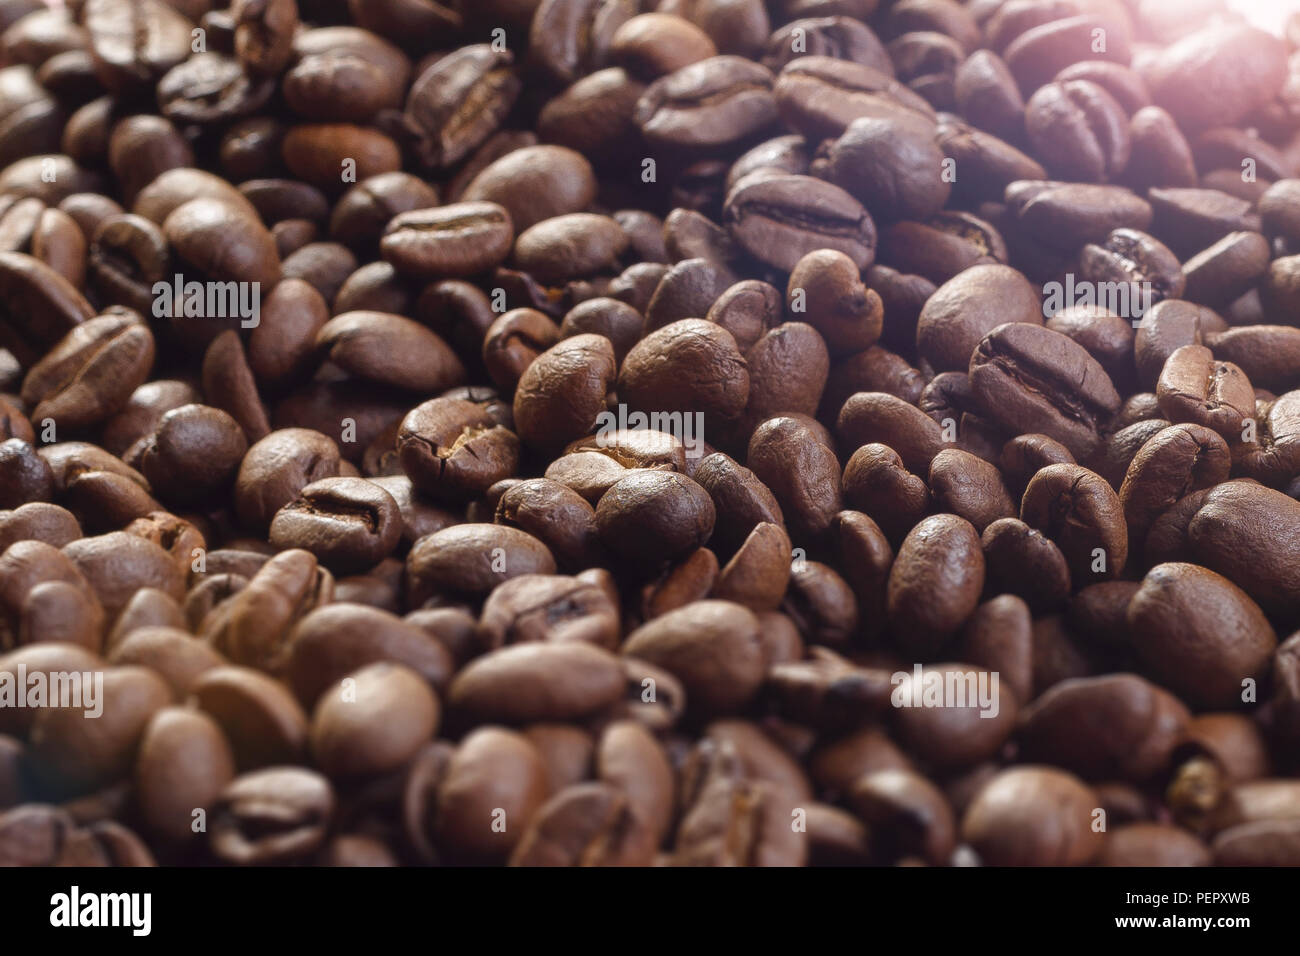 Lots of coffee beans website background textspace Stock Photo